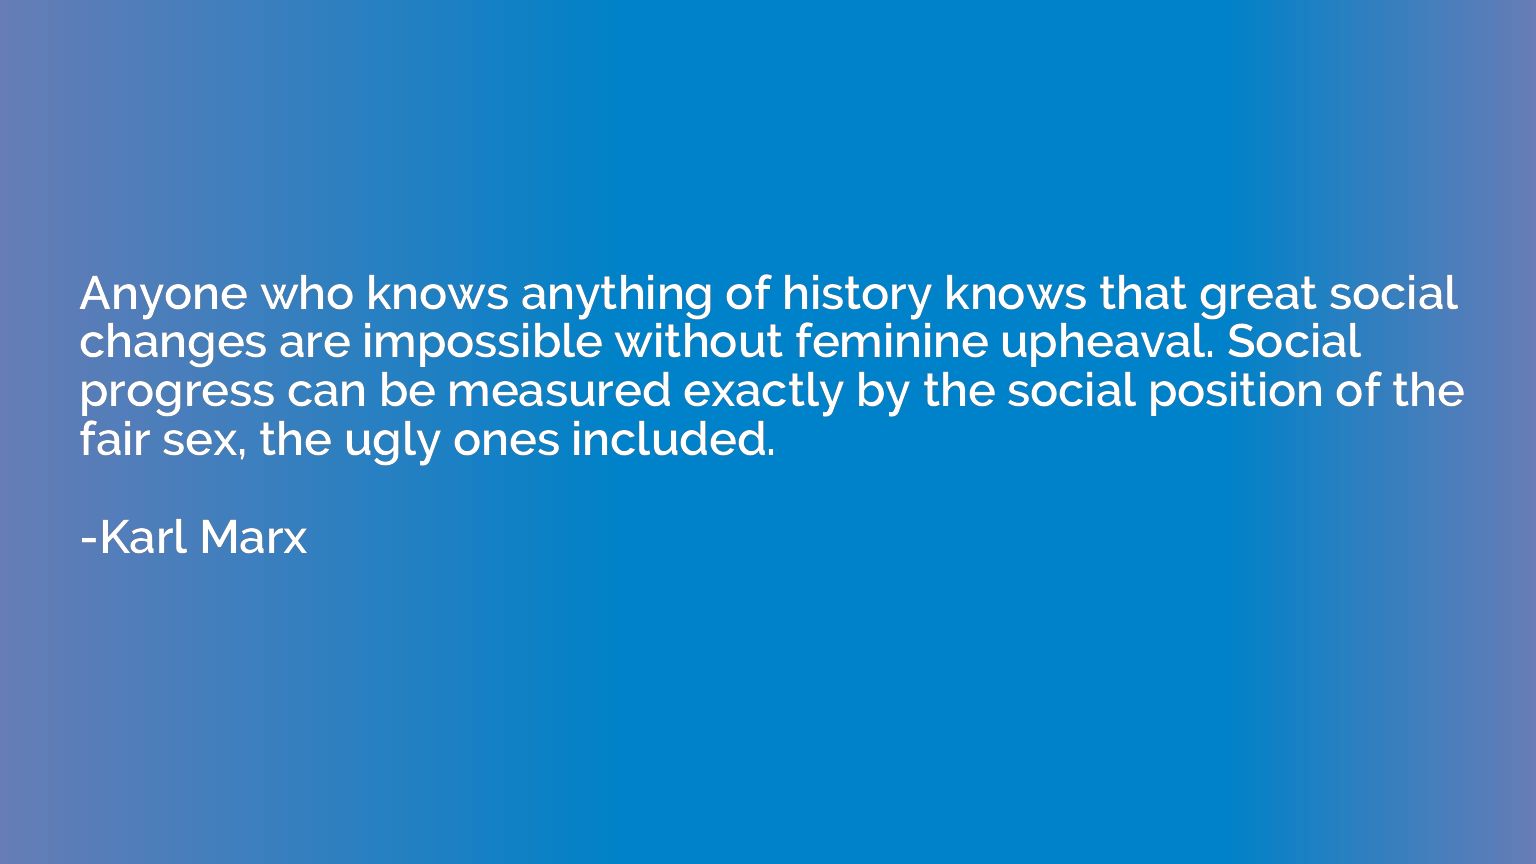 Anyone who knows anything of history knows that great social